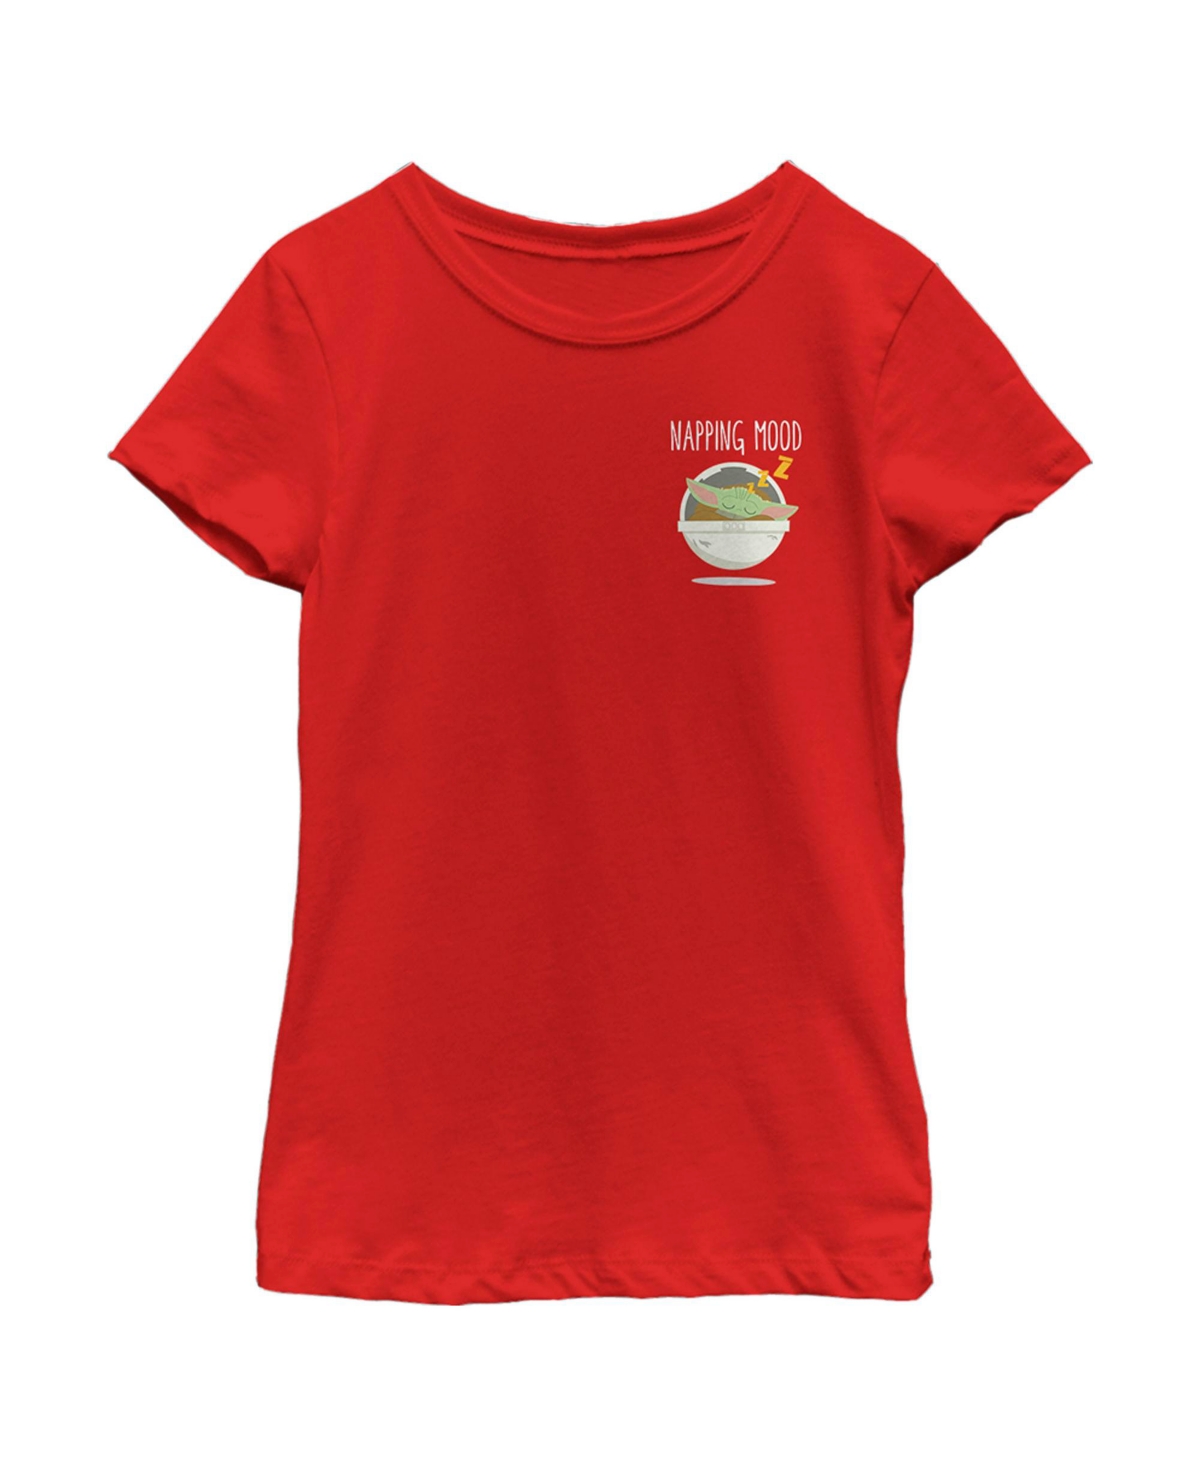 Disney Lucasfilm Girl's Star Wars: The Mandalorian Napping Mood Grogu Child T-shirt In Red